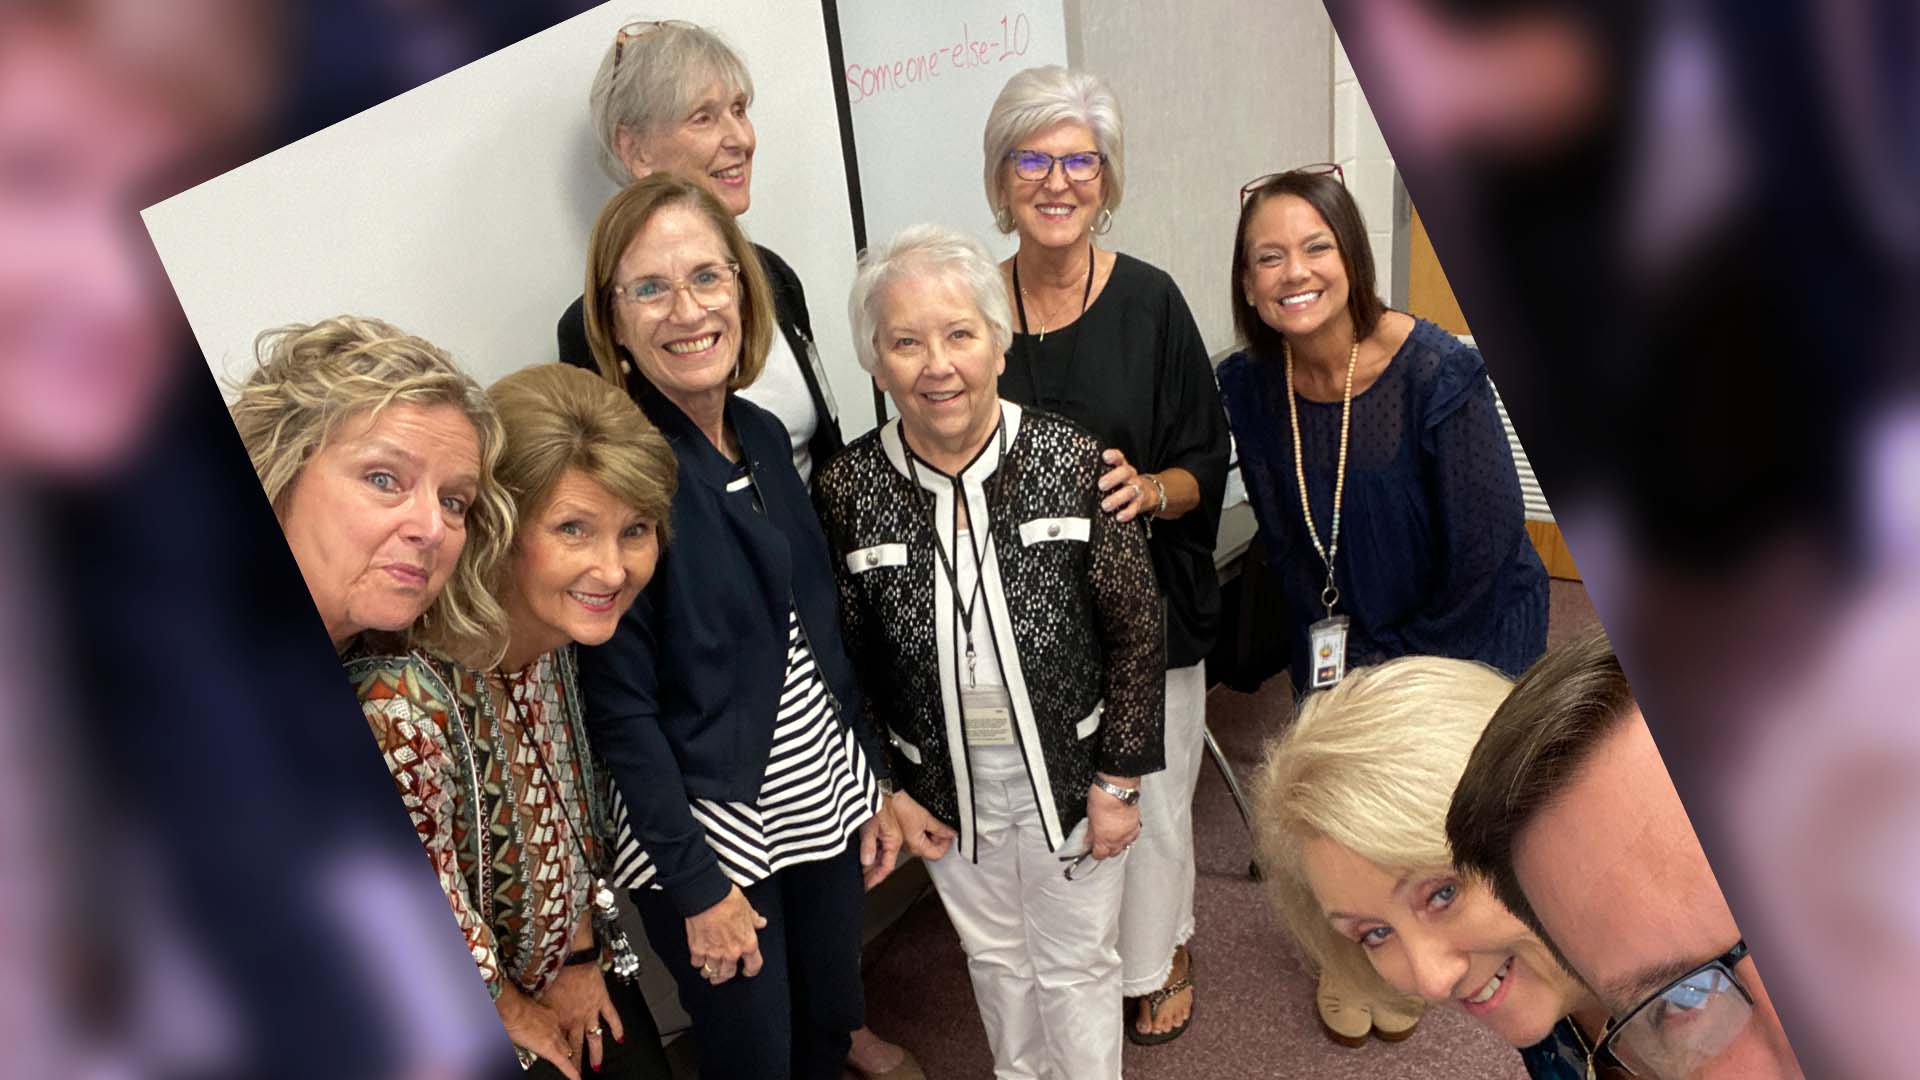 Attending the training were Lisa Dear, Vickie Brown, Betsy Stockdale, Marian Parker, Marti Rizutto, Pam Gann, Ashley Cawley, Sonja Hines, and Kevin Connell. (Not pictured: Ashante Batson)